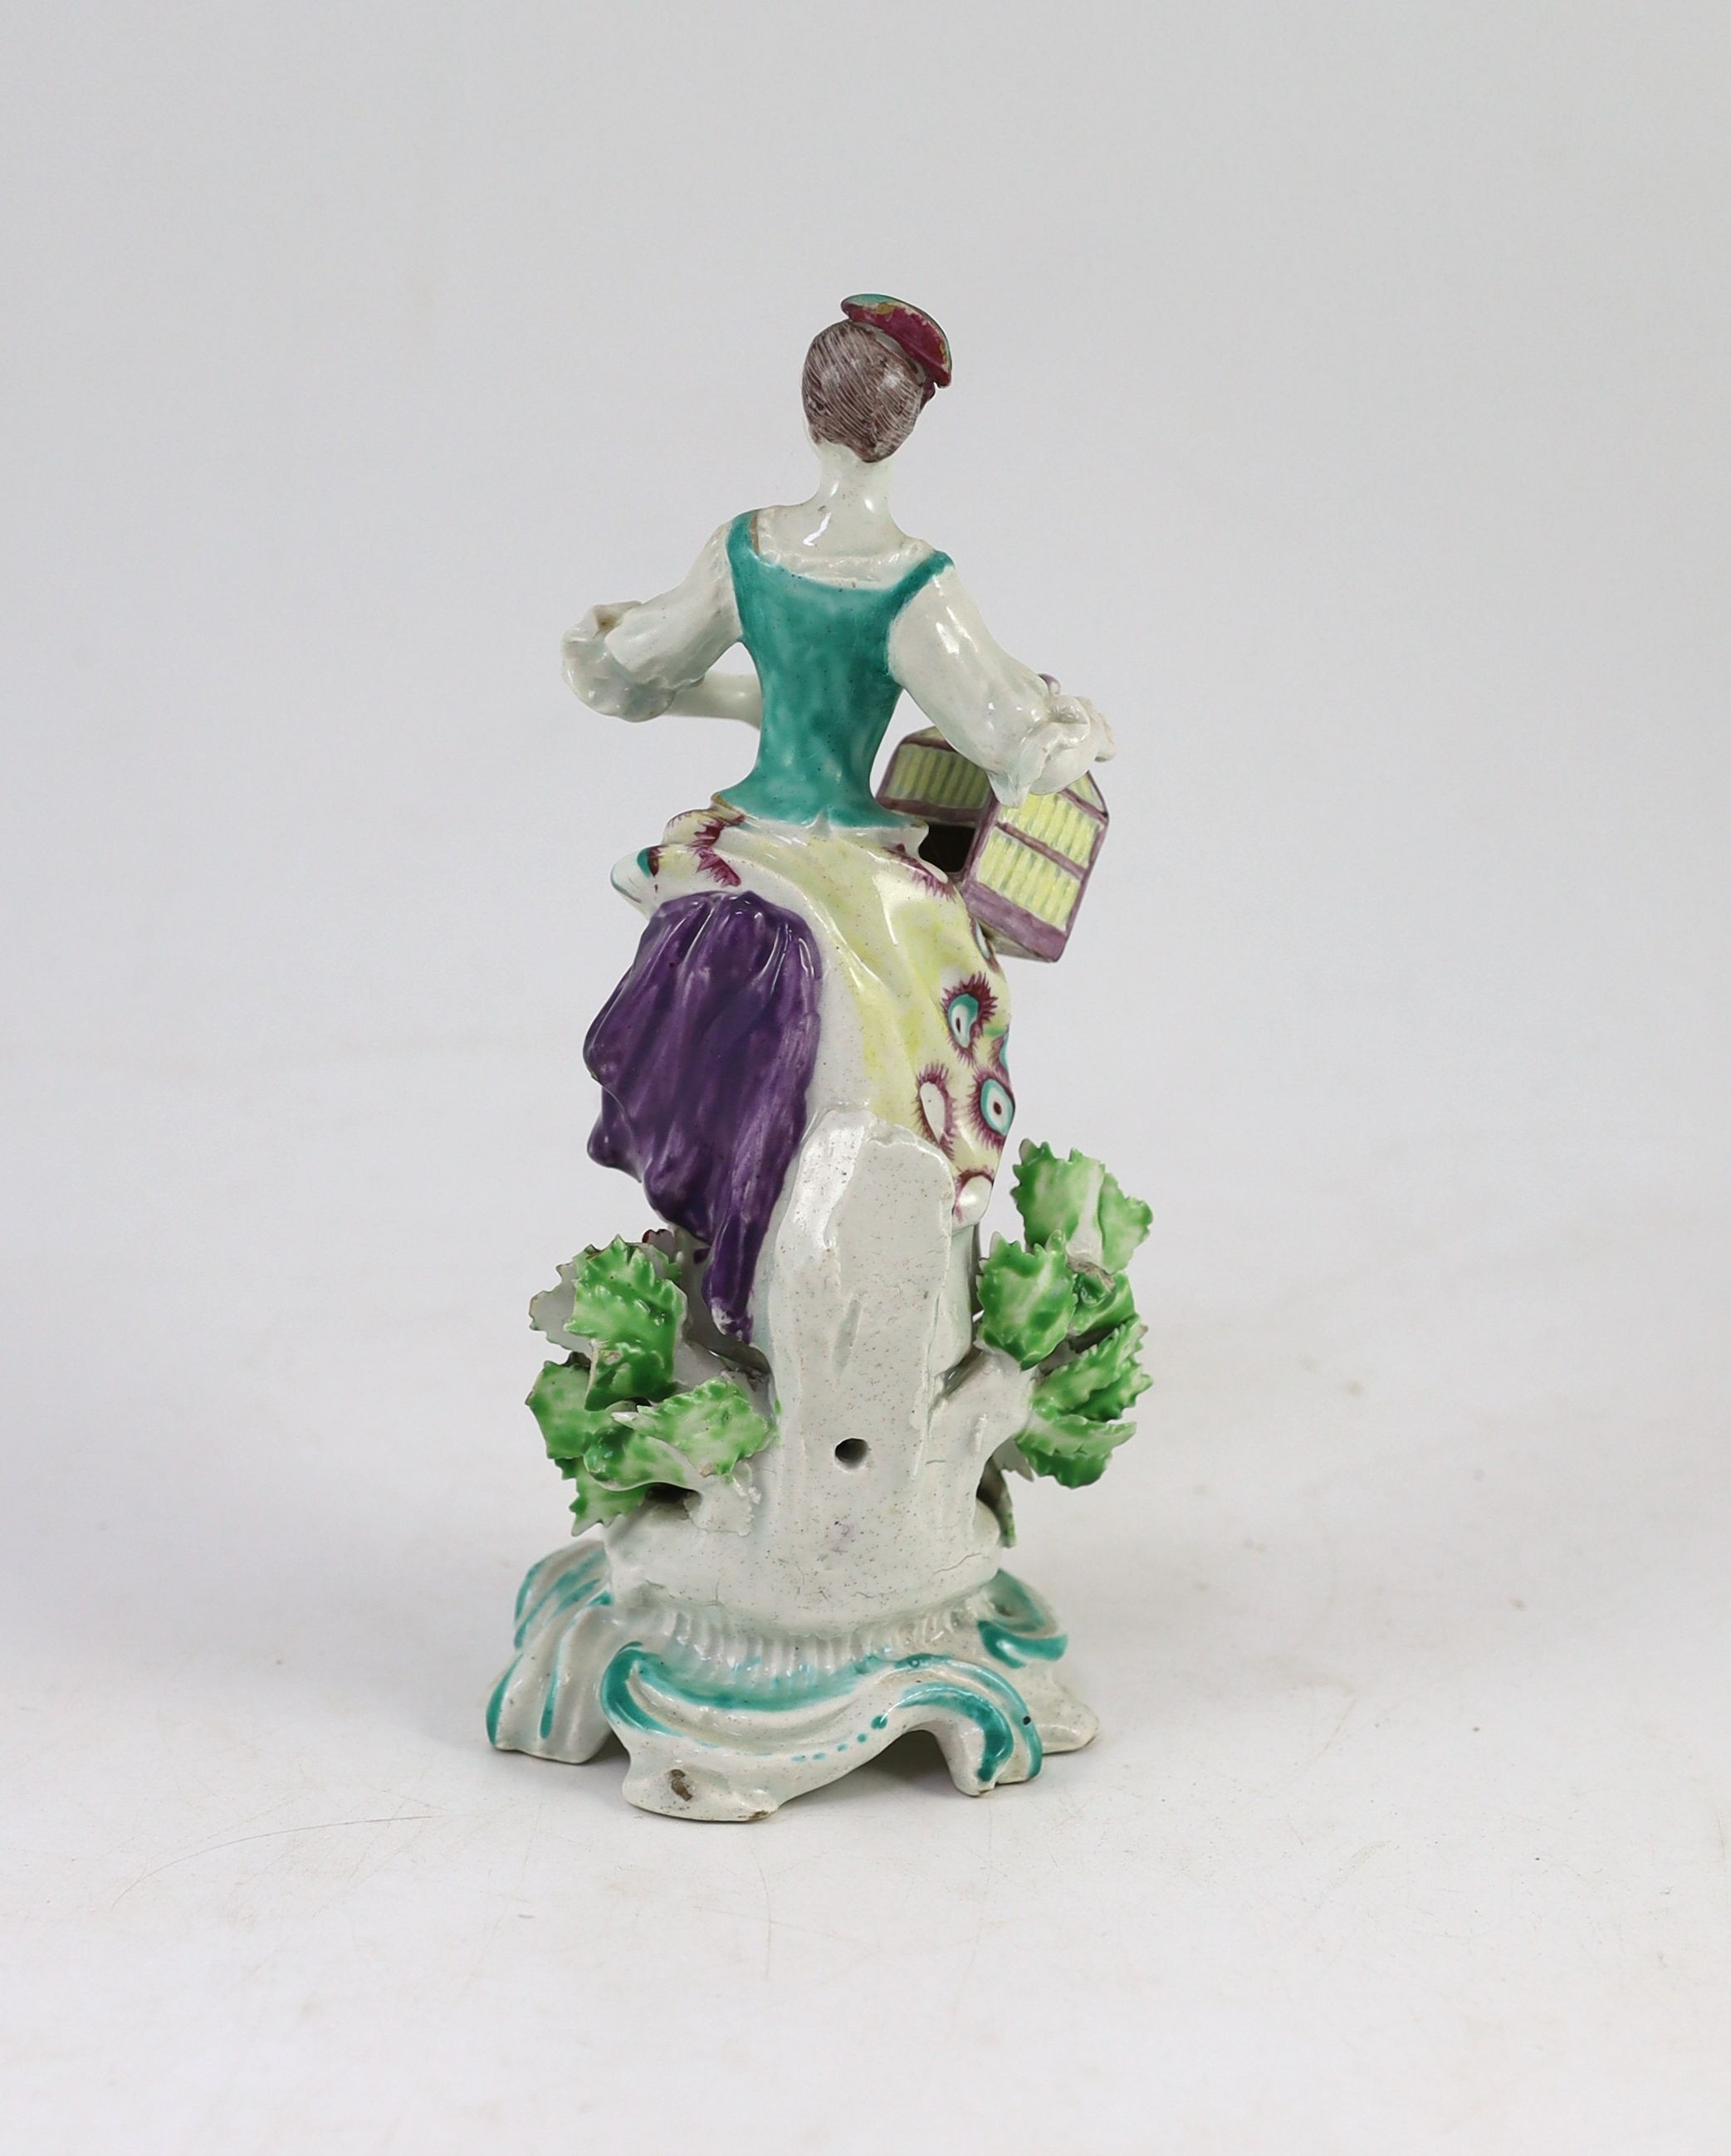 A Bow porcelain figure of a lady, emblematic of Matrimony, c.1765, 20.5cm high